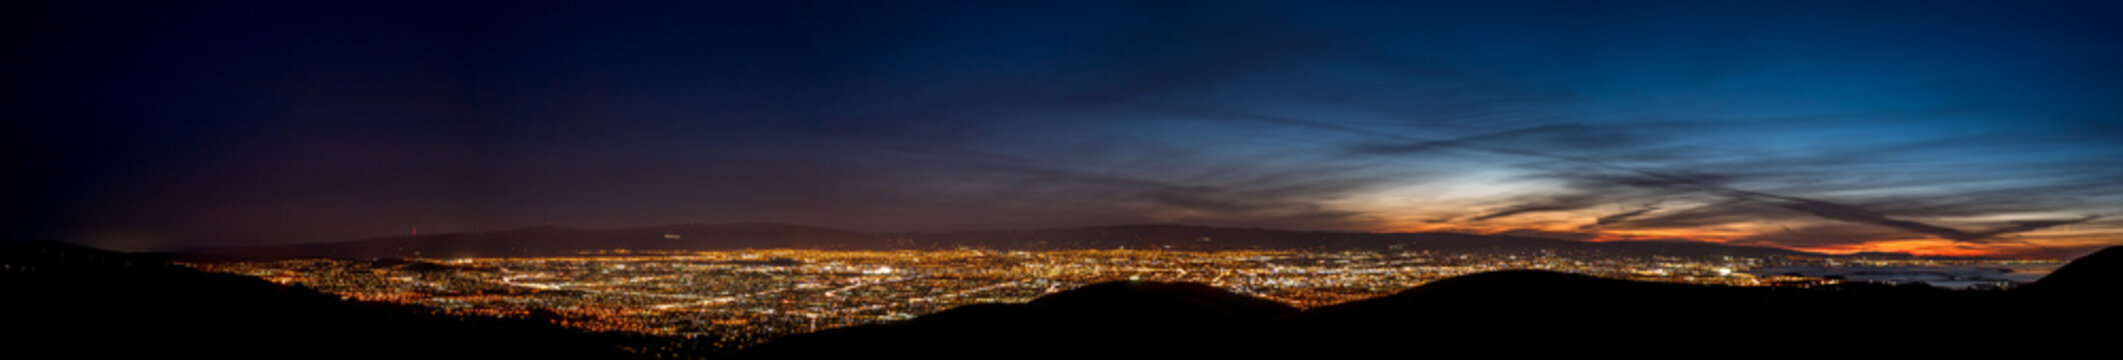 Very Wide Panorama Of Silicon Valley From San Jose To The Sea